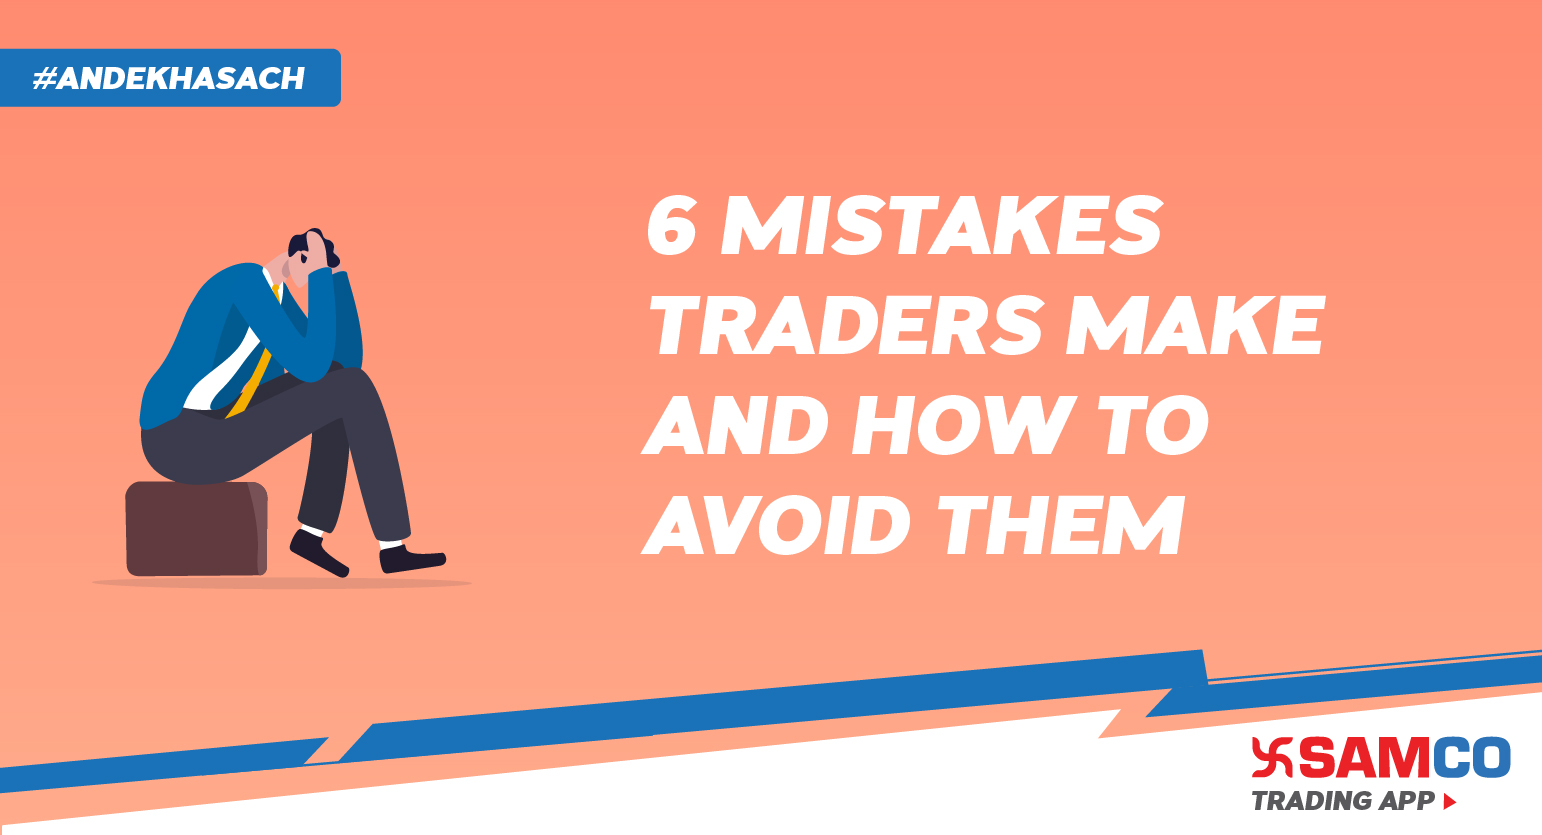 6 Mistakes Traders Make, And How to Avoid Them